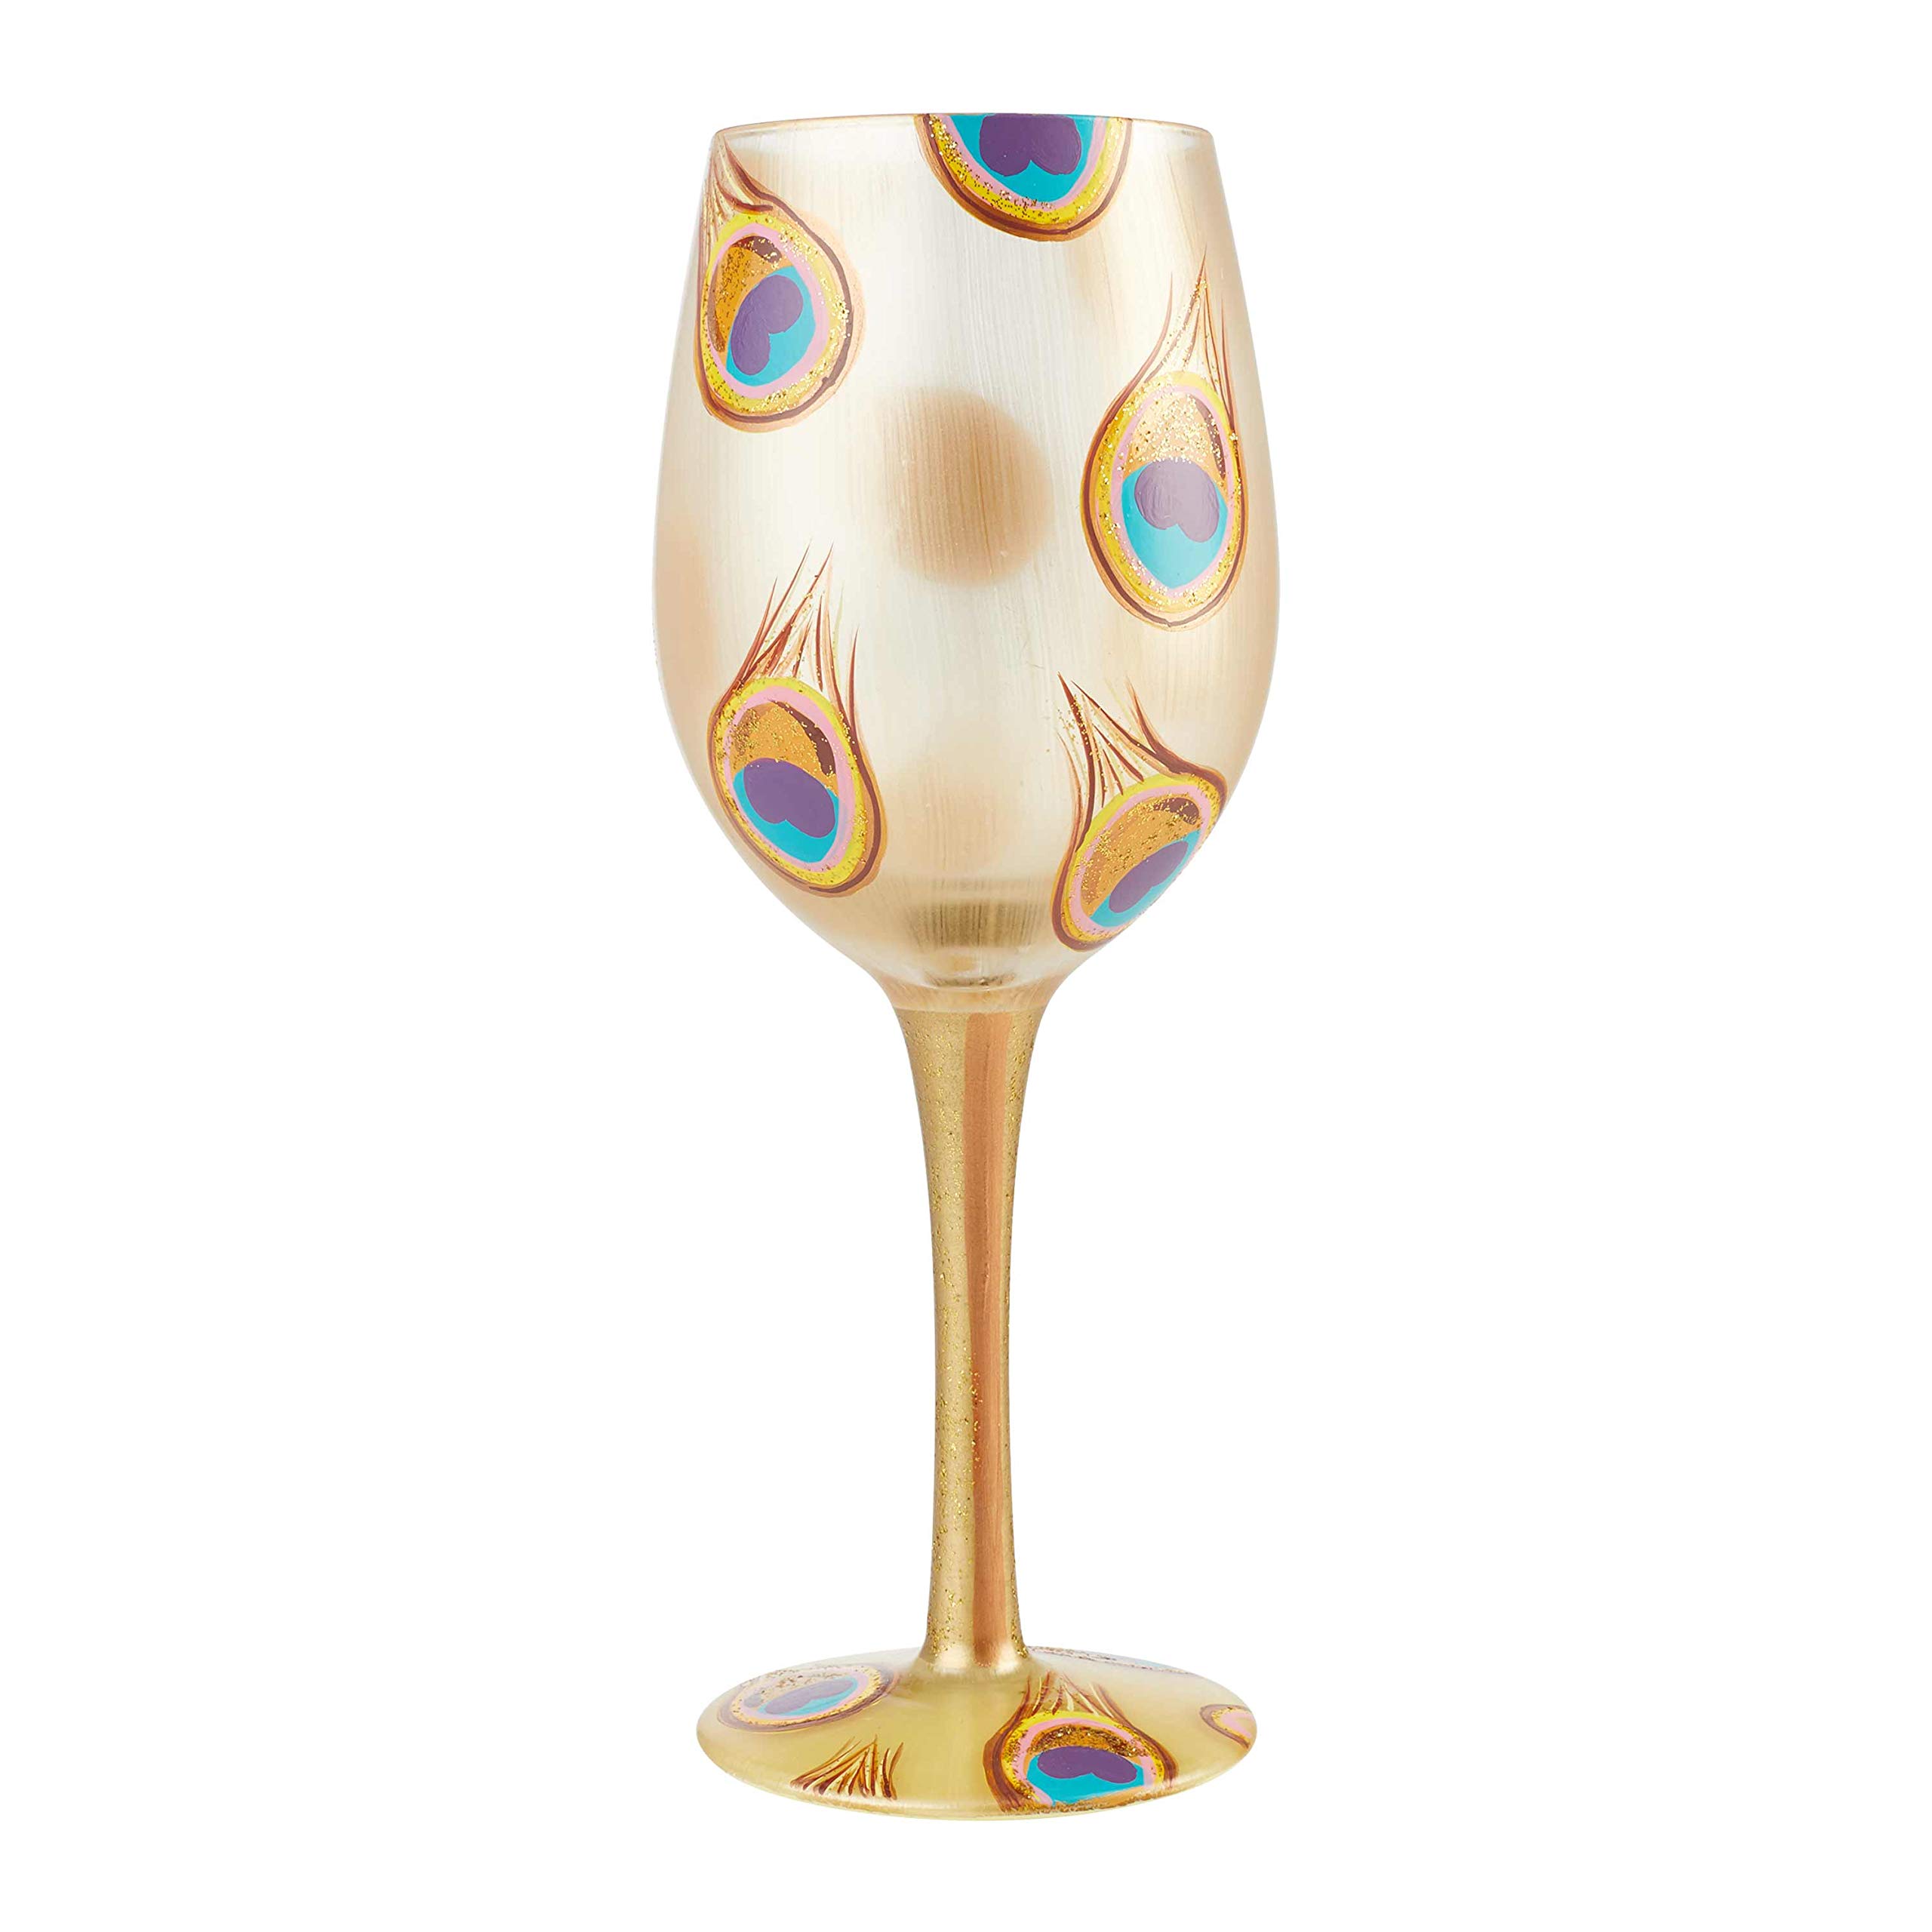 Enesco Designs by Lolita Golden Peacock Artisan Wine Glass, 1 Count (Pack of 1), Multicolor